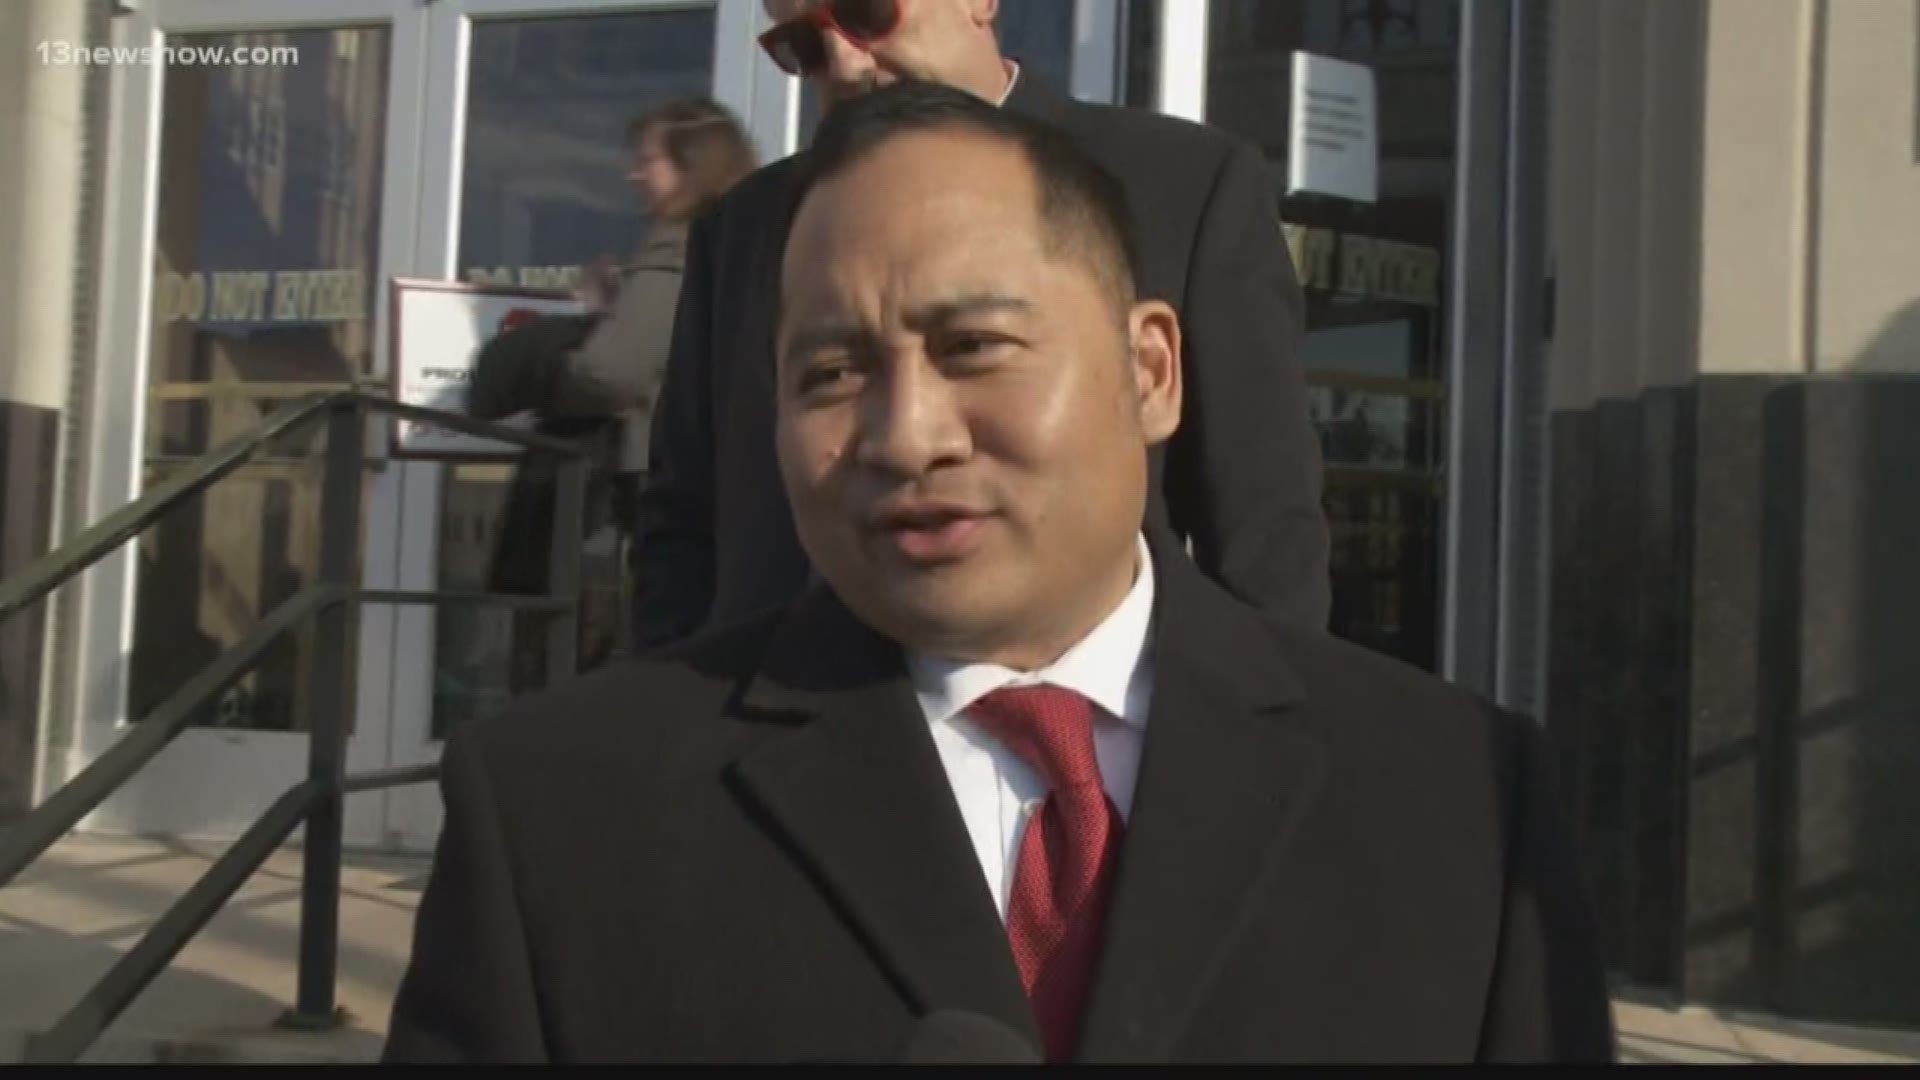 Former Virginia Beach delegate, Ron Villanueva, pleaded not guilty to fraud charges against the government.